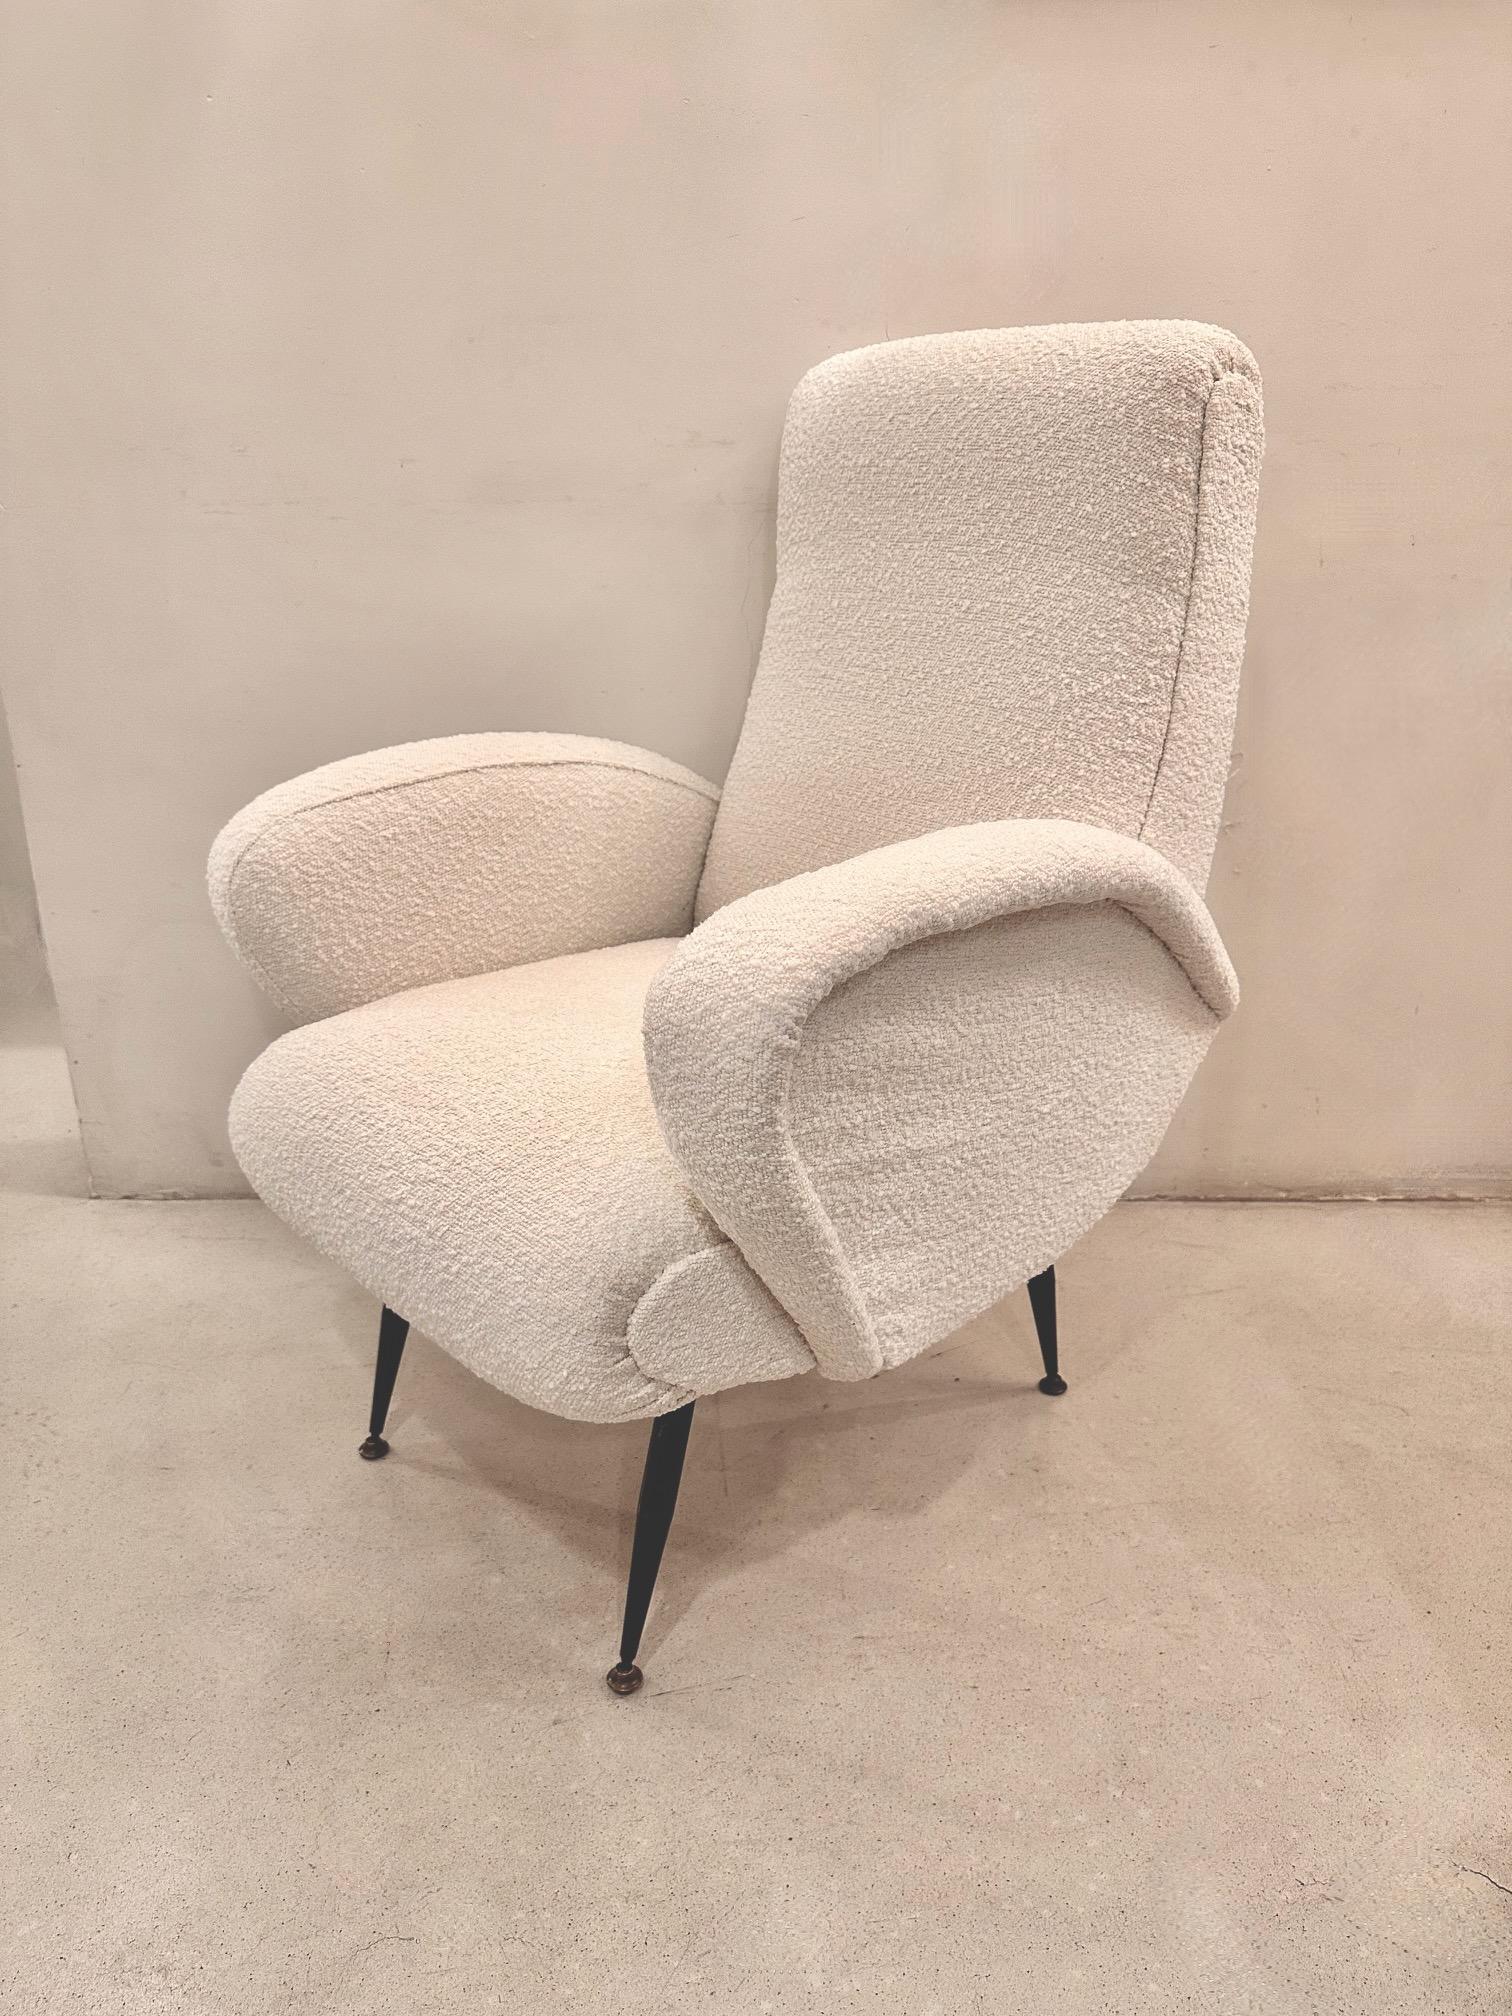 Mid-Century Ico Parisi  Pale White Armchairs.Italy 1960 For Sale 1